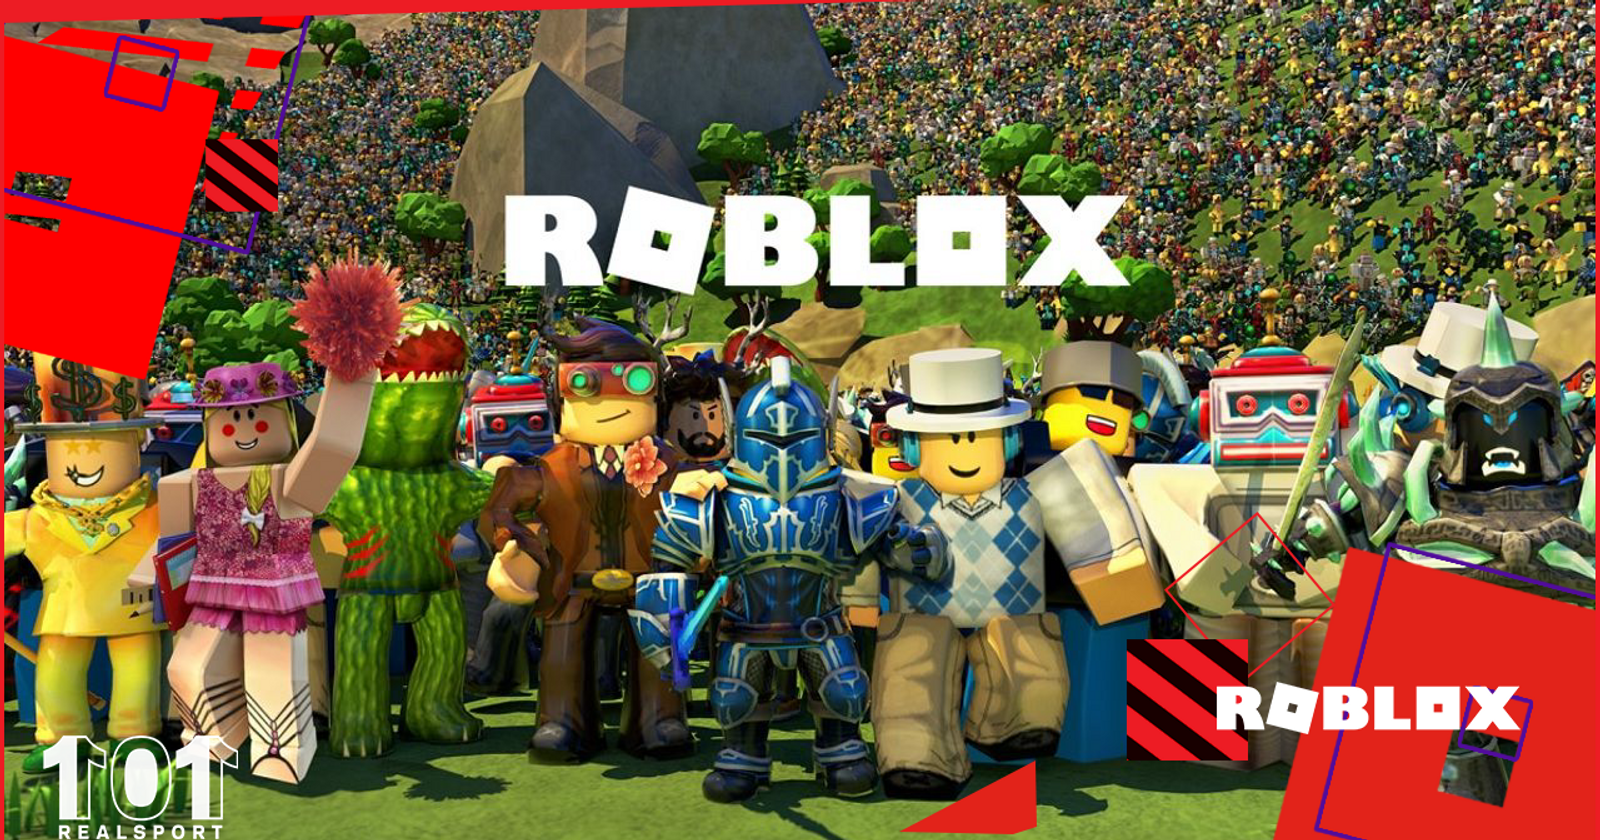 Roblox Robux Generator: Are They Safe? Do They Give Out Free Robux?